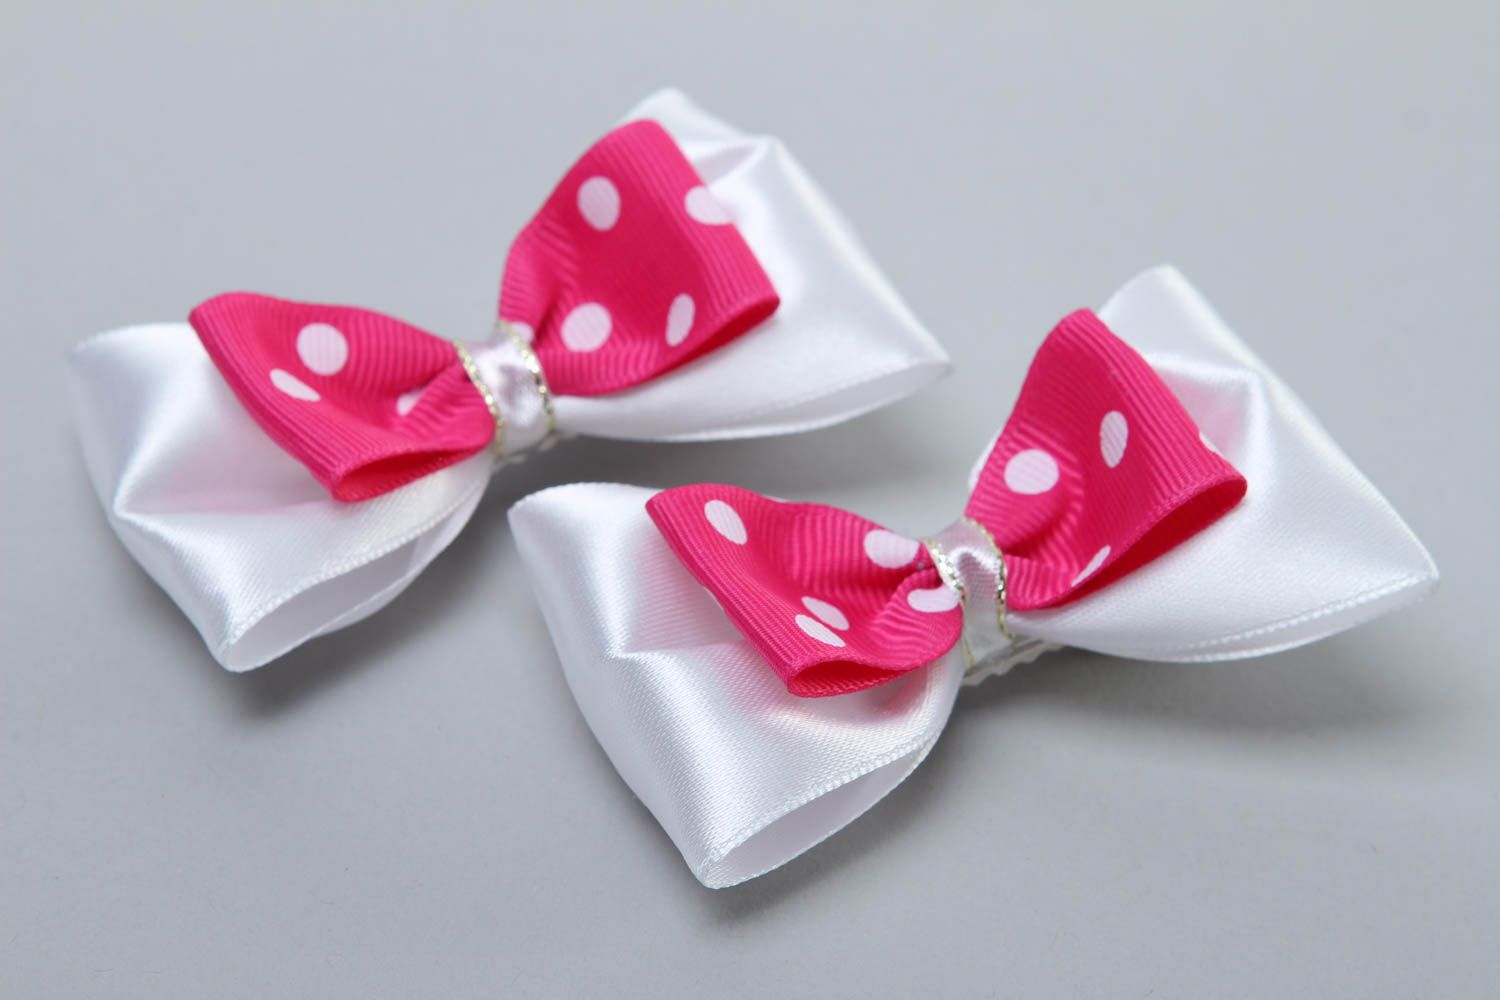 Gentle childrens hair bow handmade bow hair clip 2 pieces gifts for her photo 3